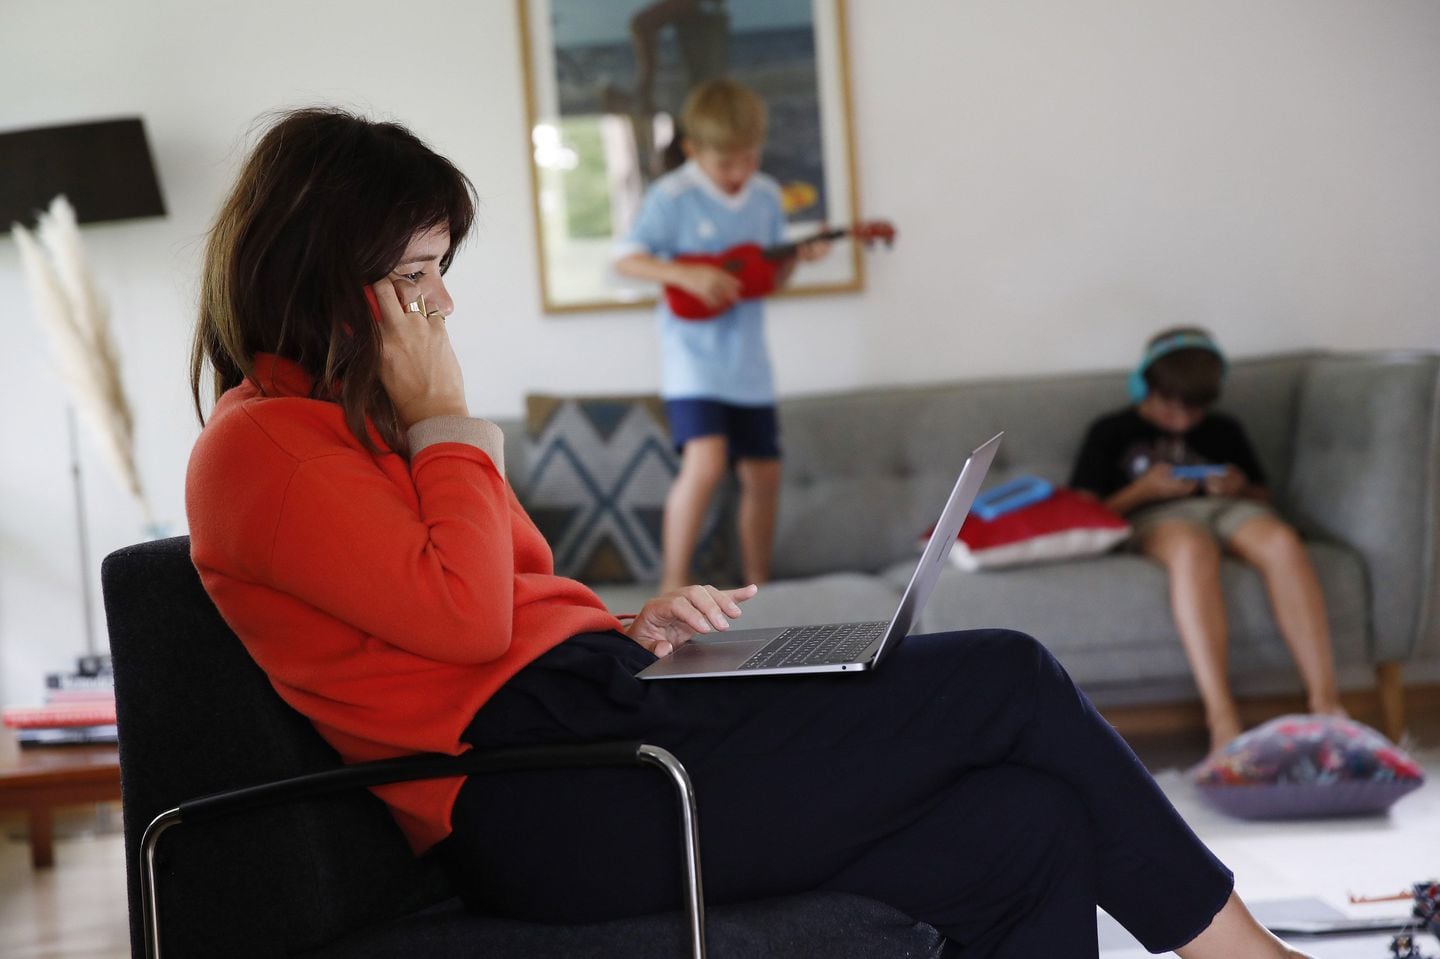 A woman works at a laptop computer in a lounge as children play beyond in this arranged photograph taken in Bern, Switzerland, on Wednesday, Aug. 19, 2020. The biggest Wall Street firms are navigating how and when to bring employees safely back to office buildings in global financial hubs, after lockdowns to address the Covid-19 pandemic forced them to do their jobs remotely for months. Photographer: Stefan Wermuth/Bloomberg